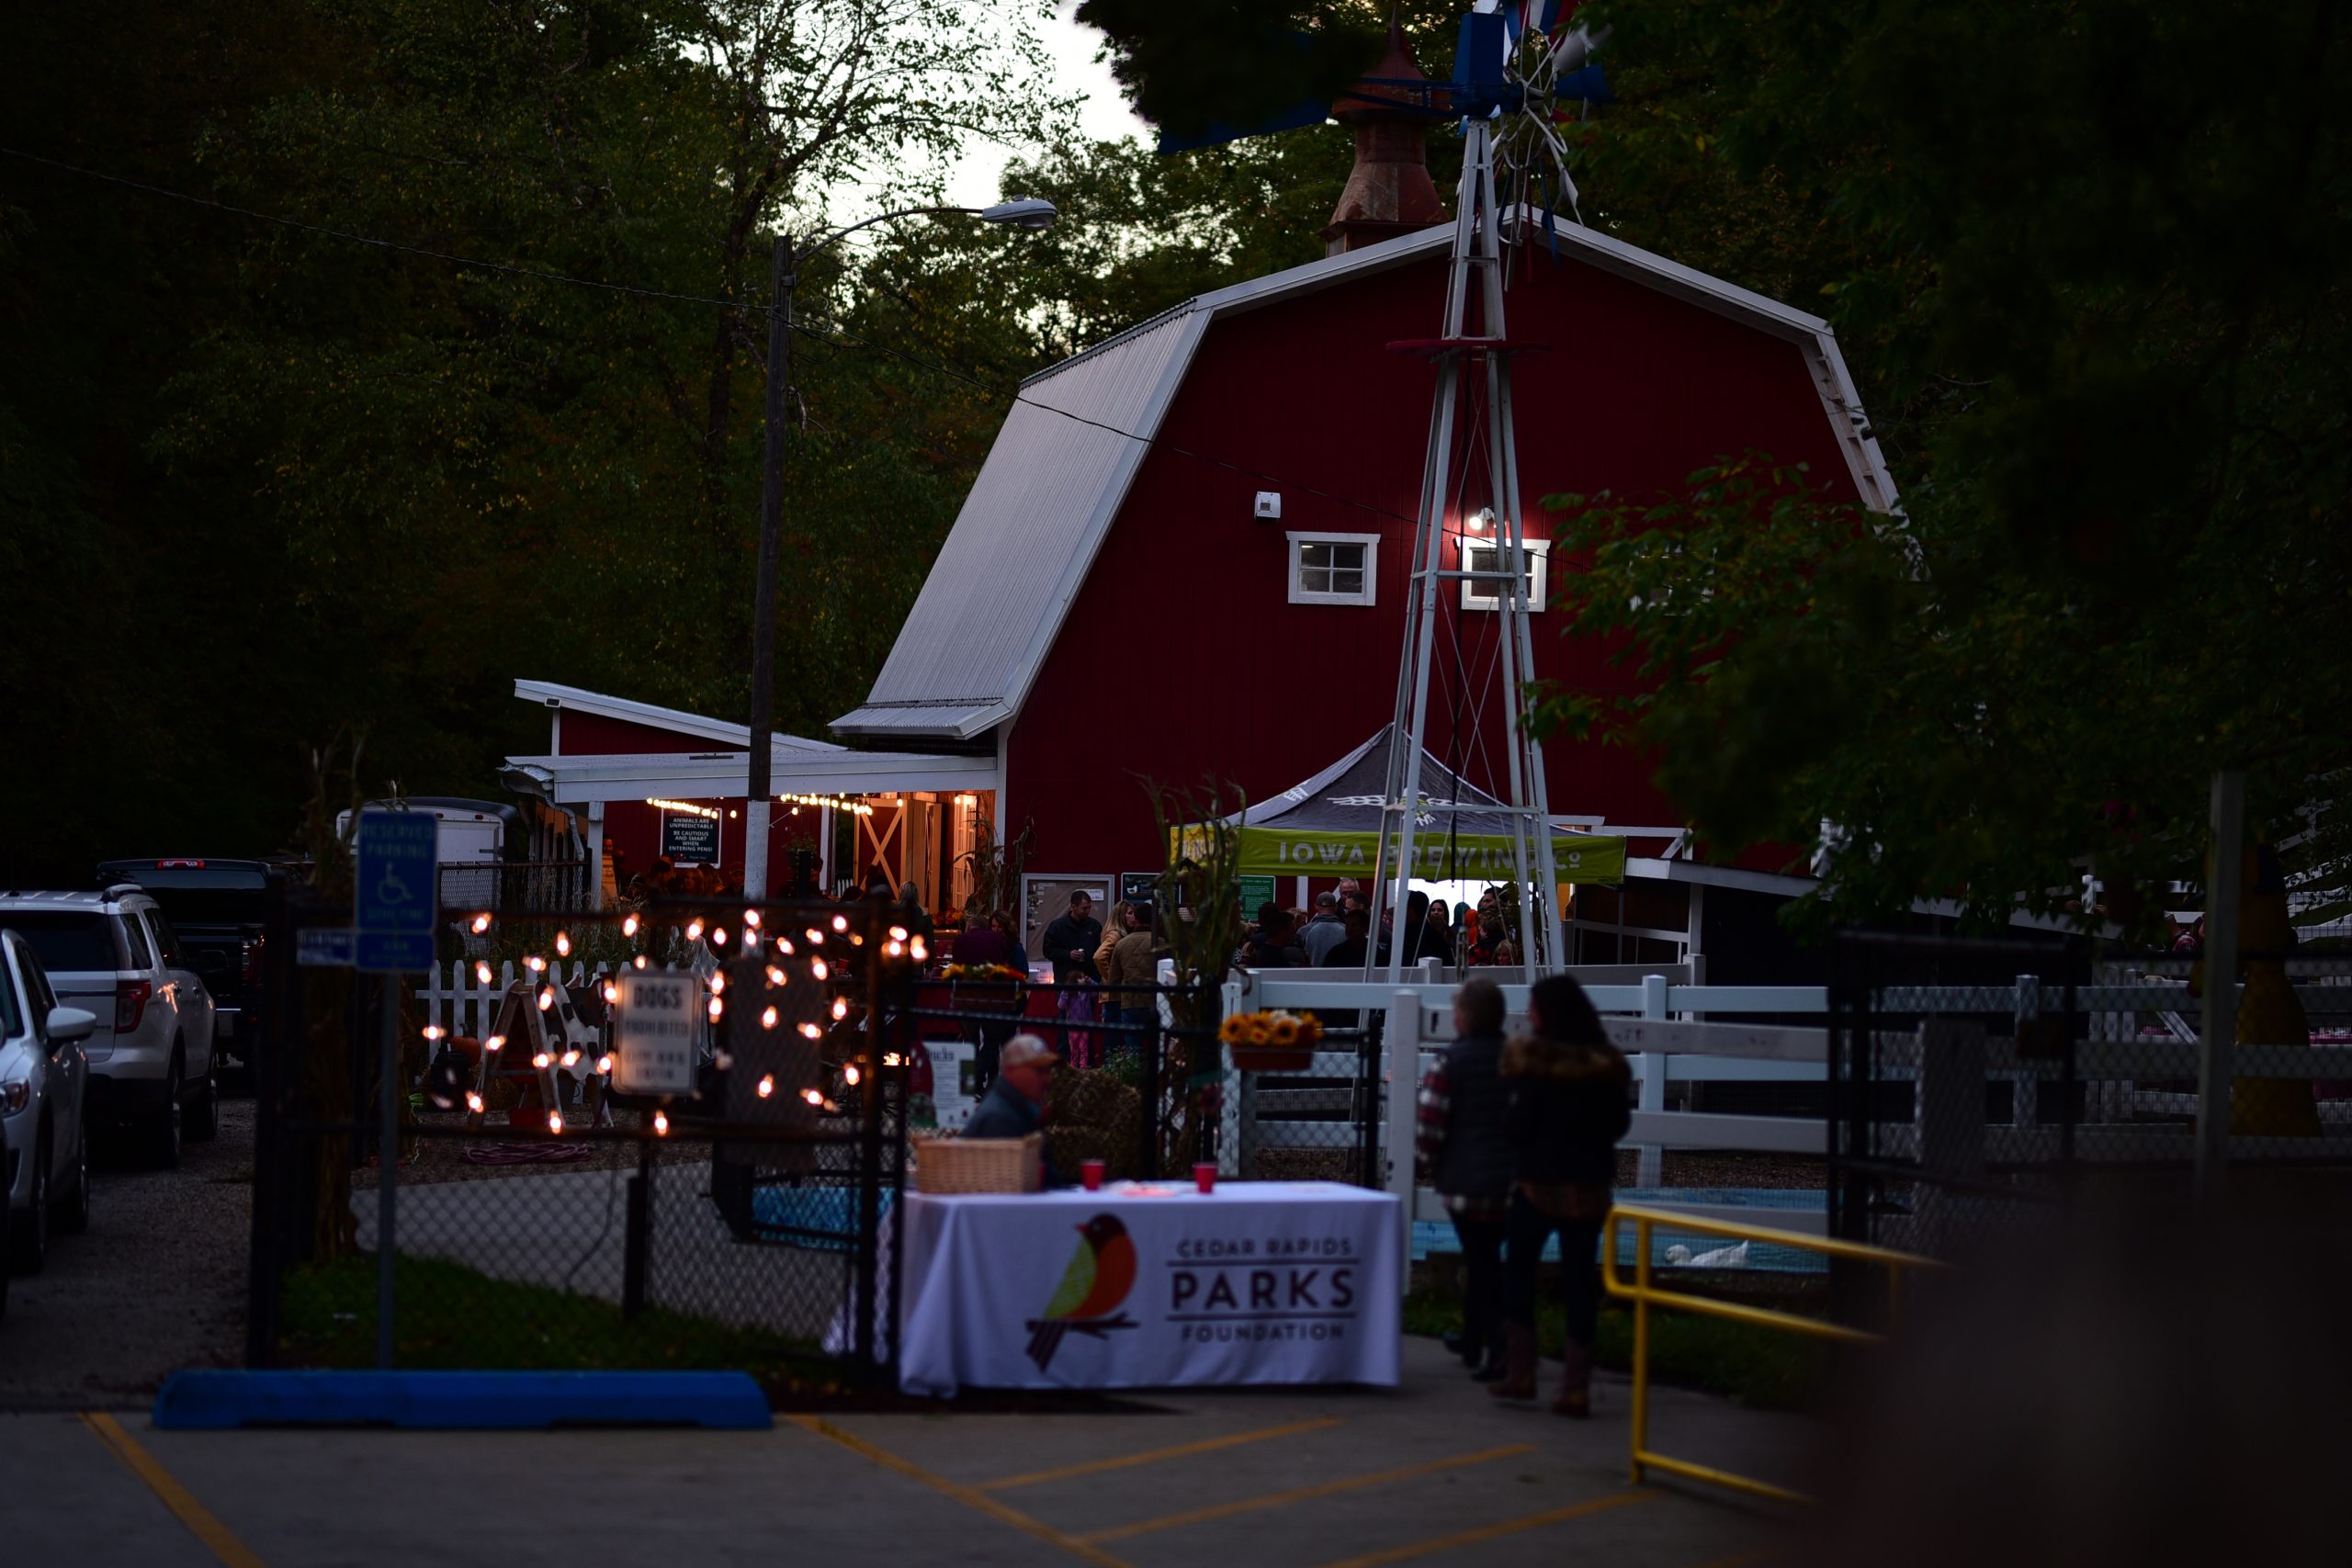 This is a picture of the 2022 Beers in the Barnyard event. The Old McDonald Farm is in the background along with an Iowa Brewing Co. Tent. In the foreground is a table adorned with a Cedar Rapids Parks Foundation tablecloth. There are lights on the fencing, and people are scattered around the event.